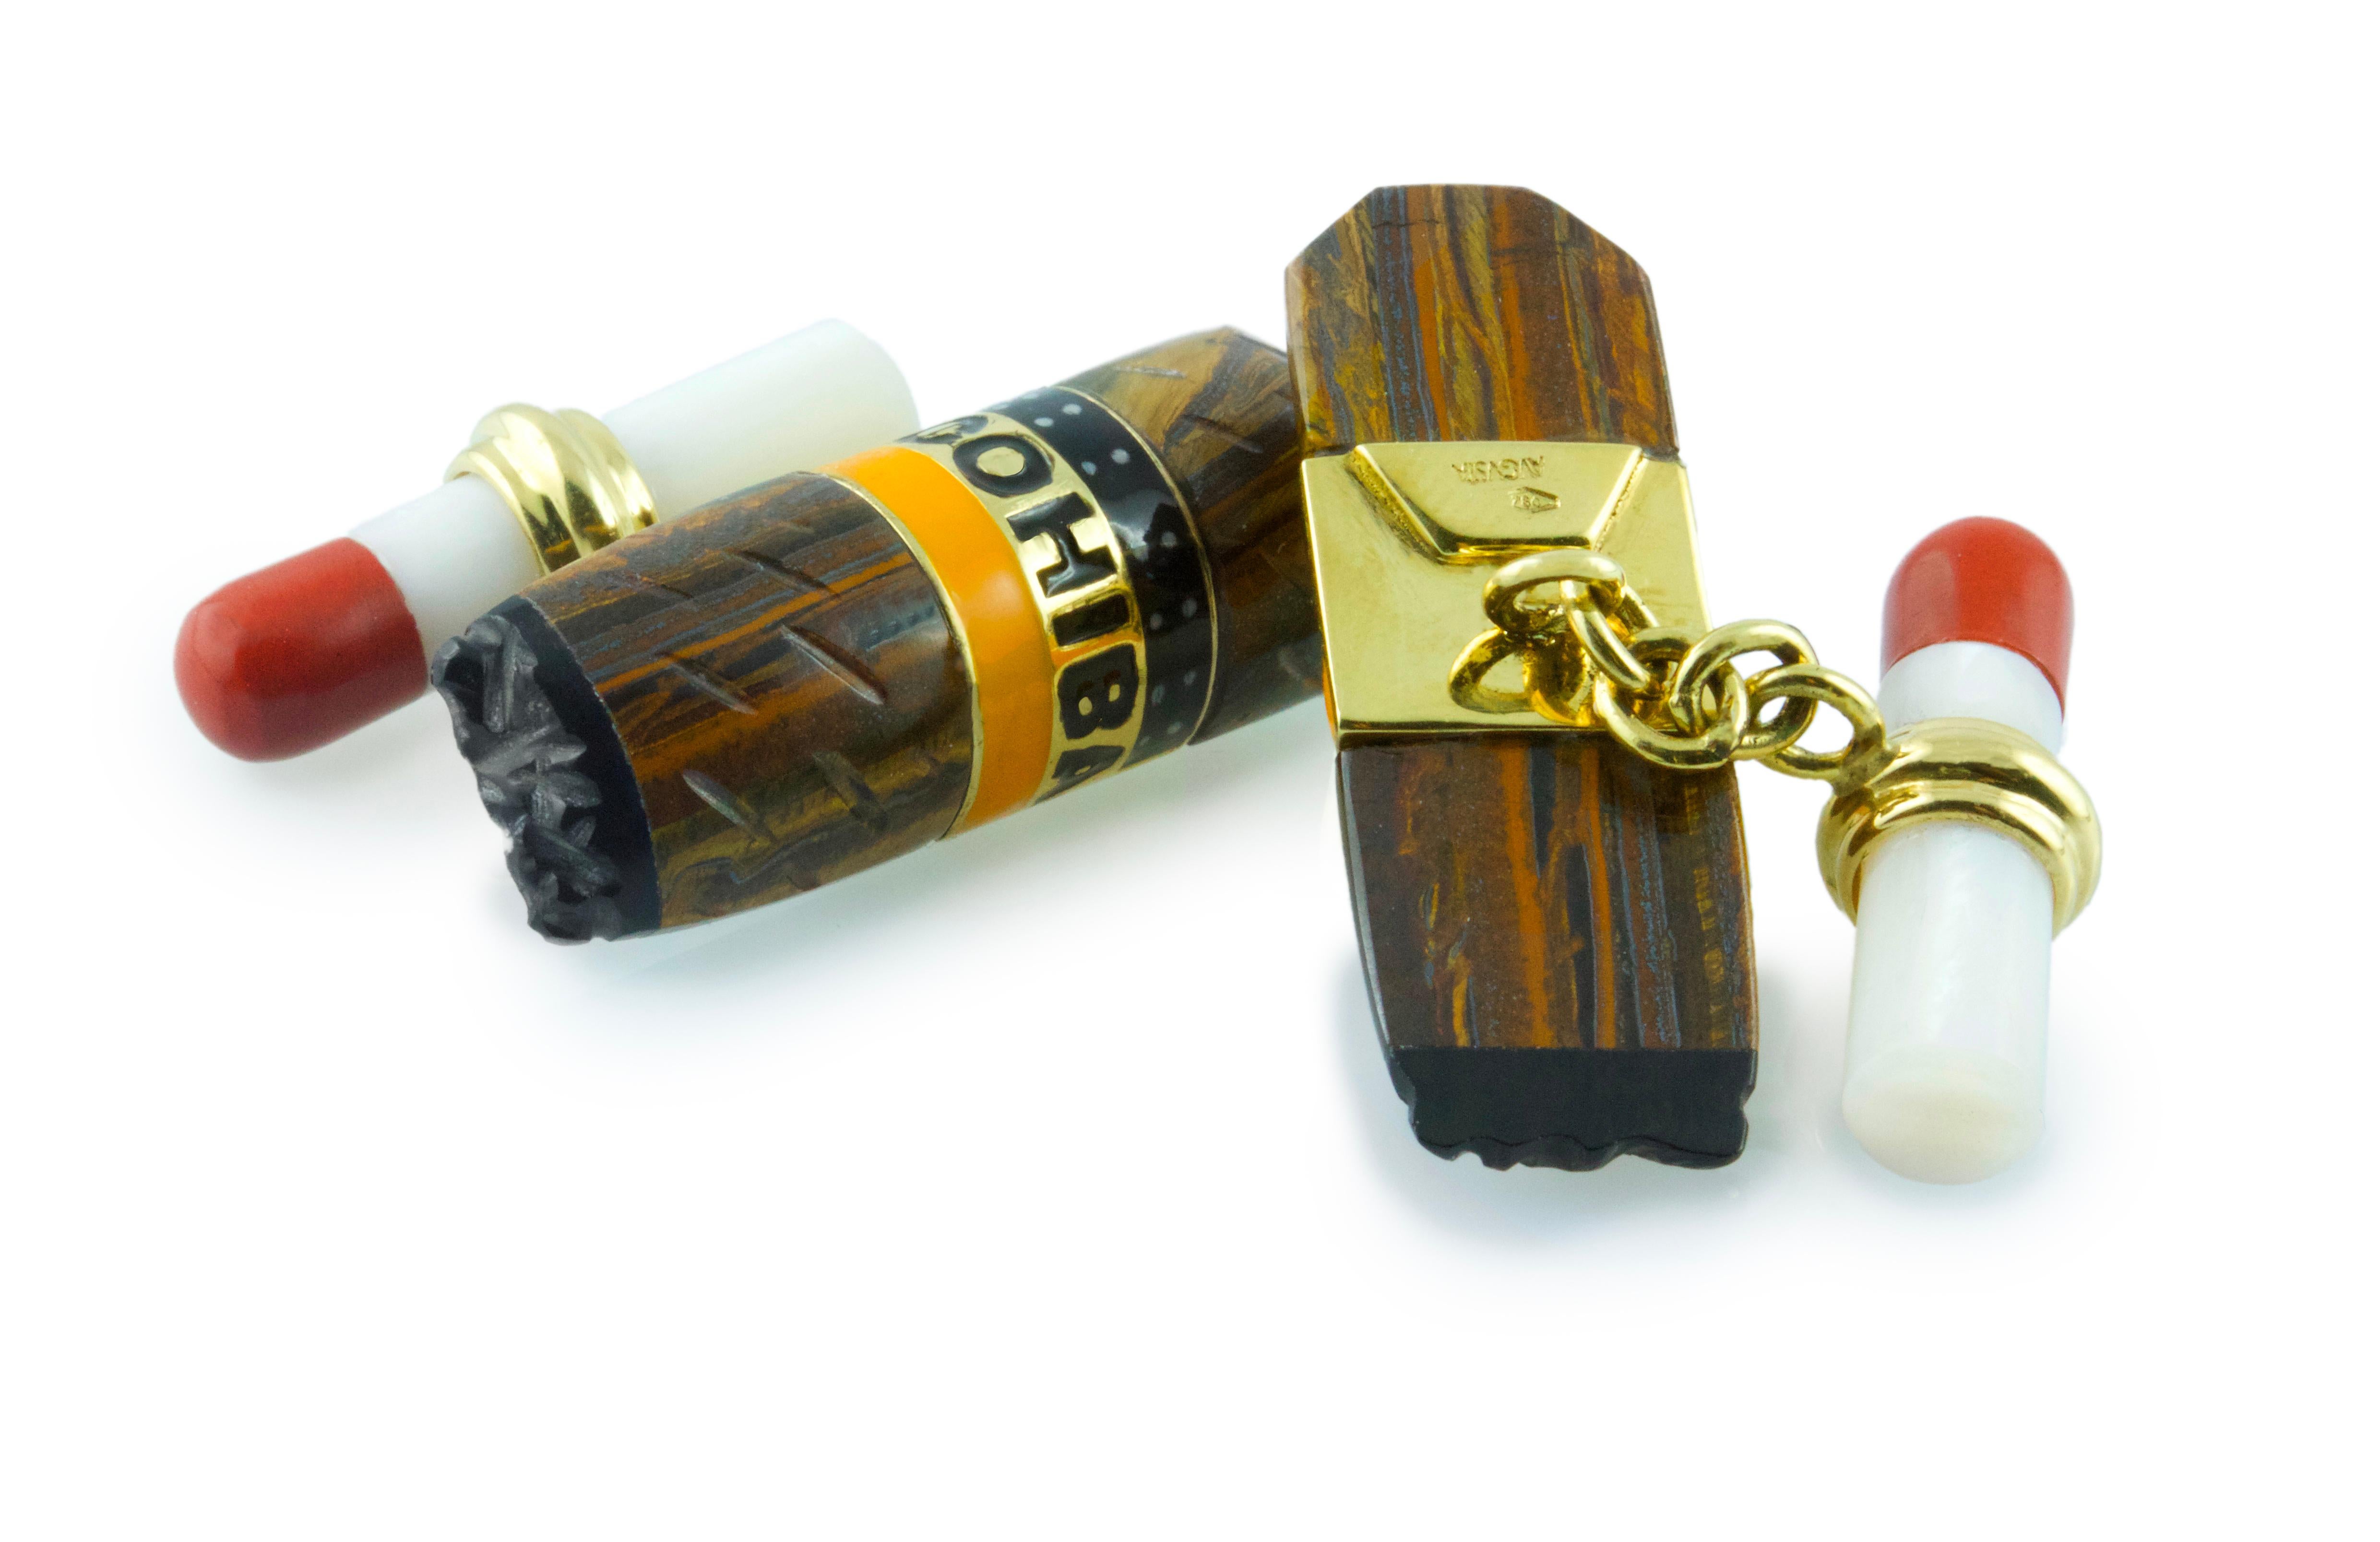 These playful cufflinks are shaped to resemble a pair of Cuban cigars with their iconic thick, cylindrical shape and a classic label reading “Cohiba”. These pieces are made of hawk eyes and enamels in the same warm shades and are mounted on 18k